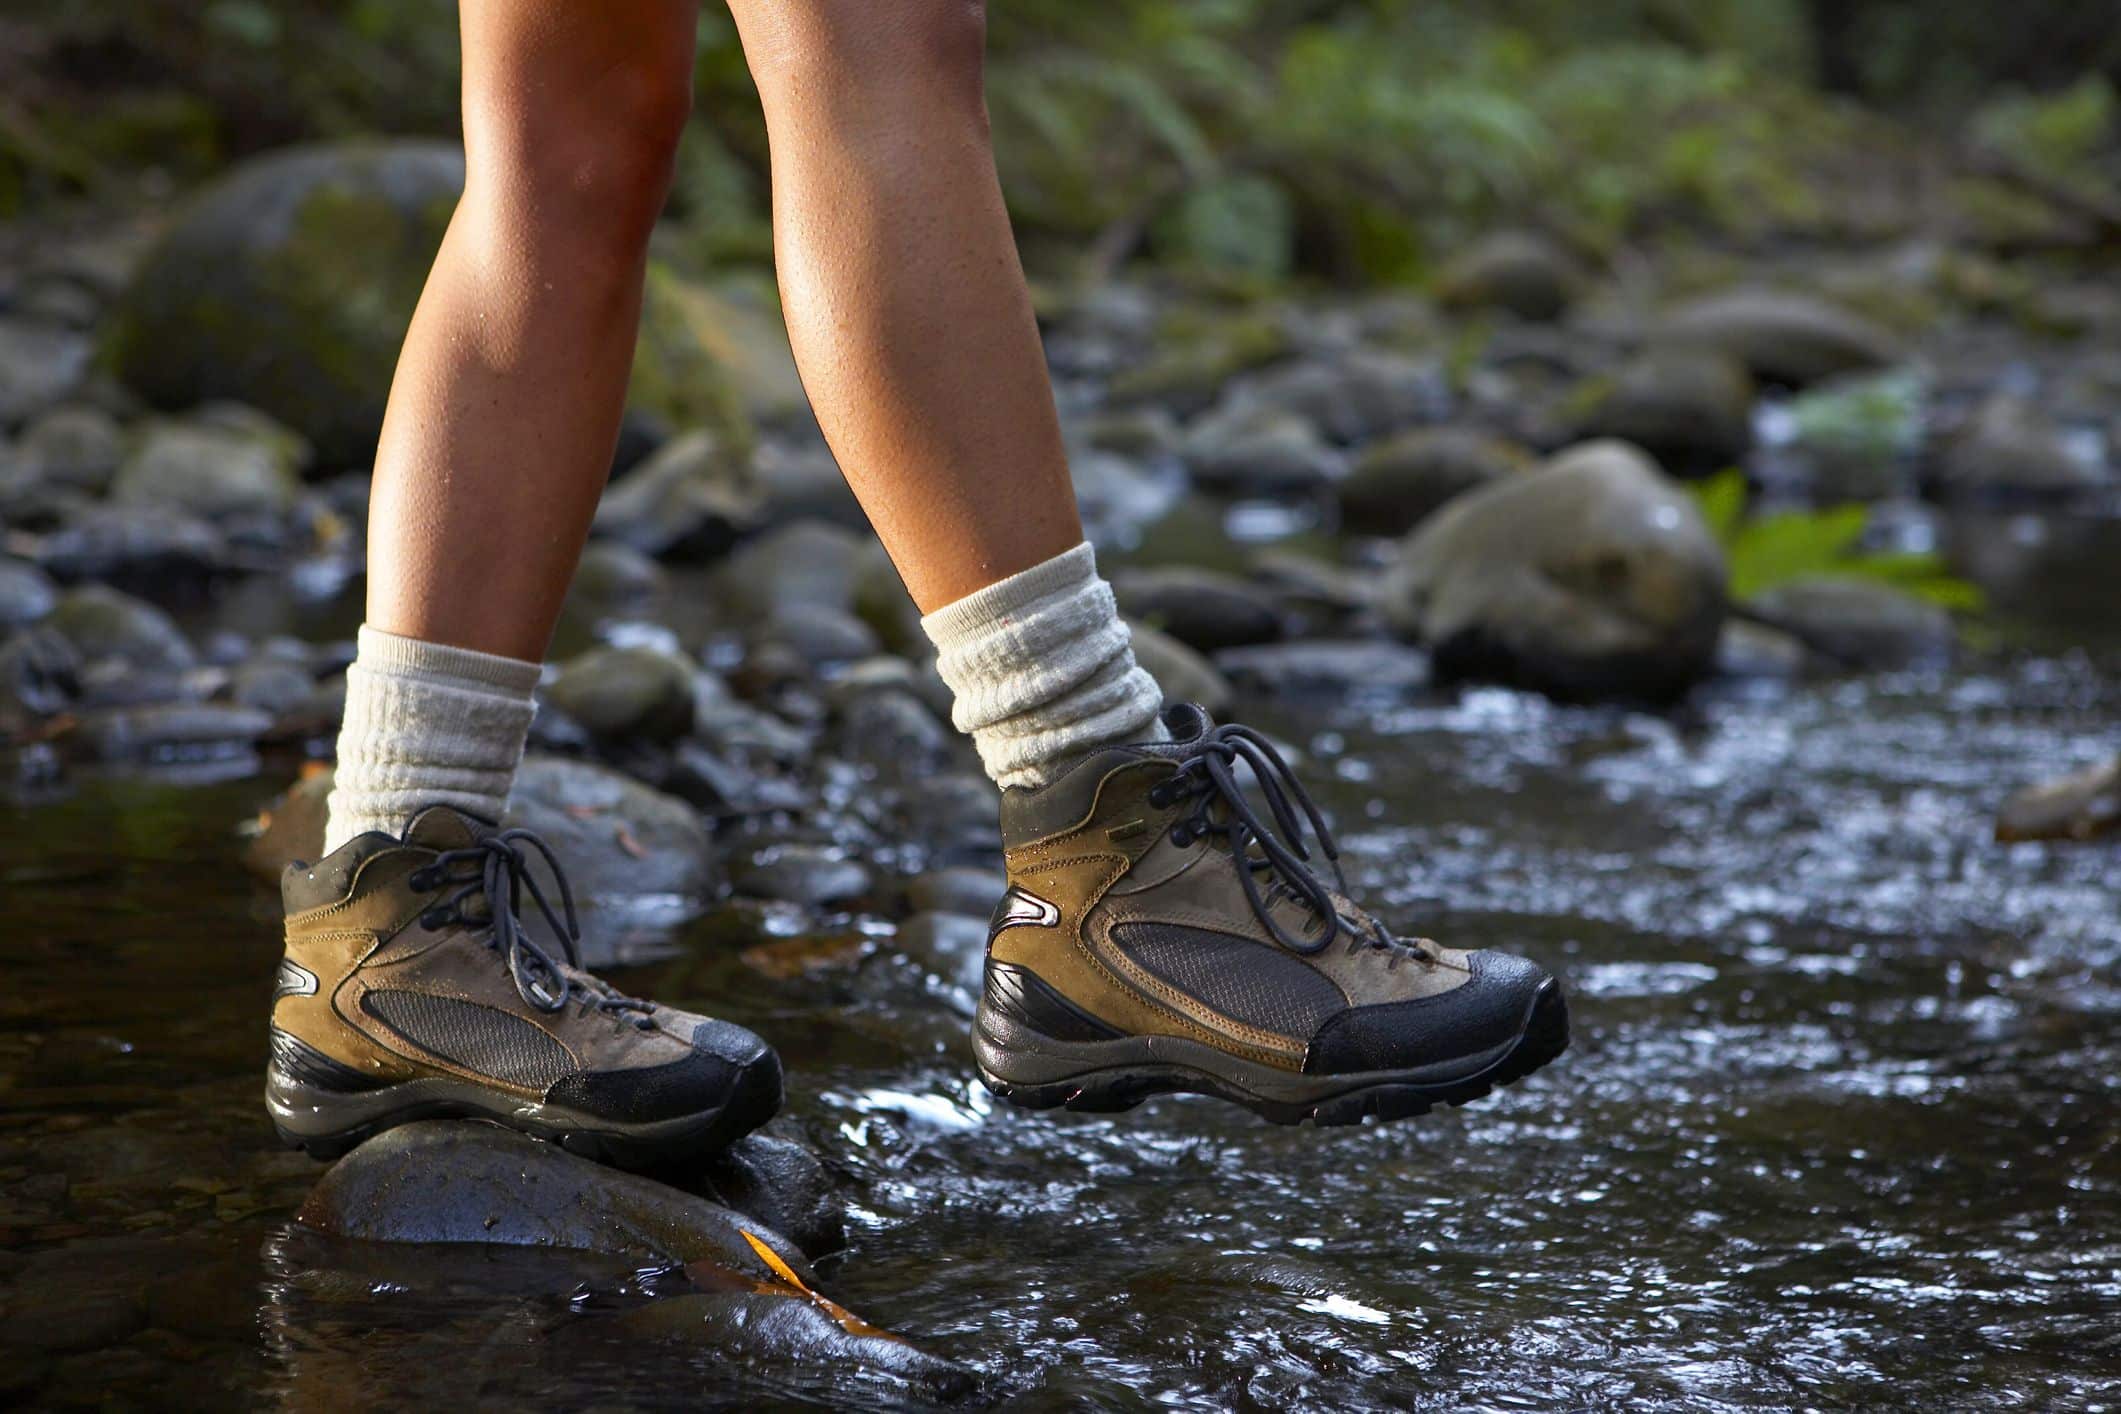 Tips for Choosing Hiking Boots